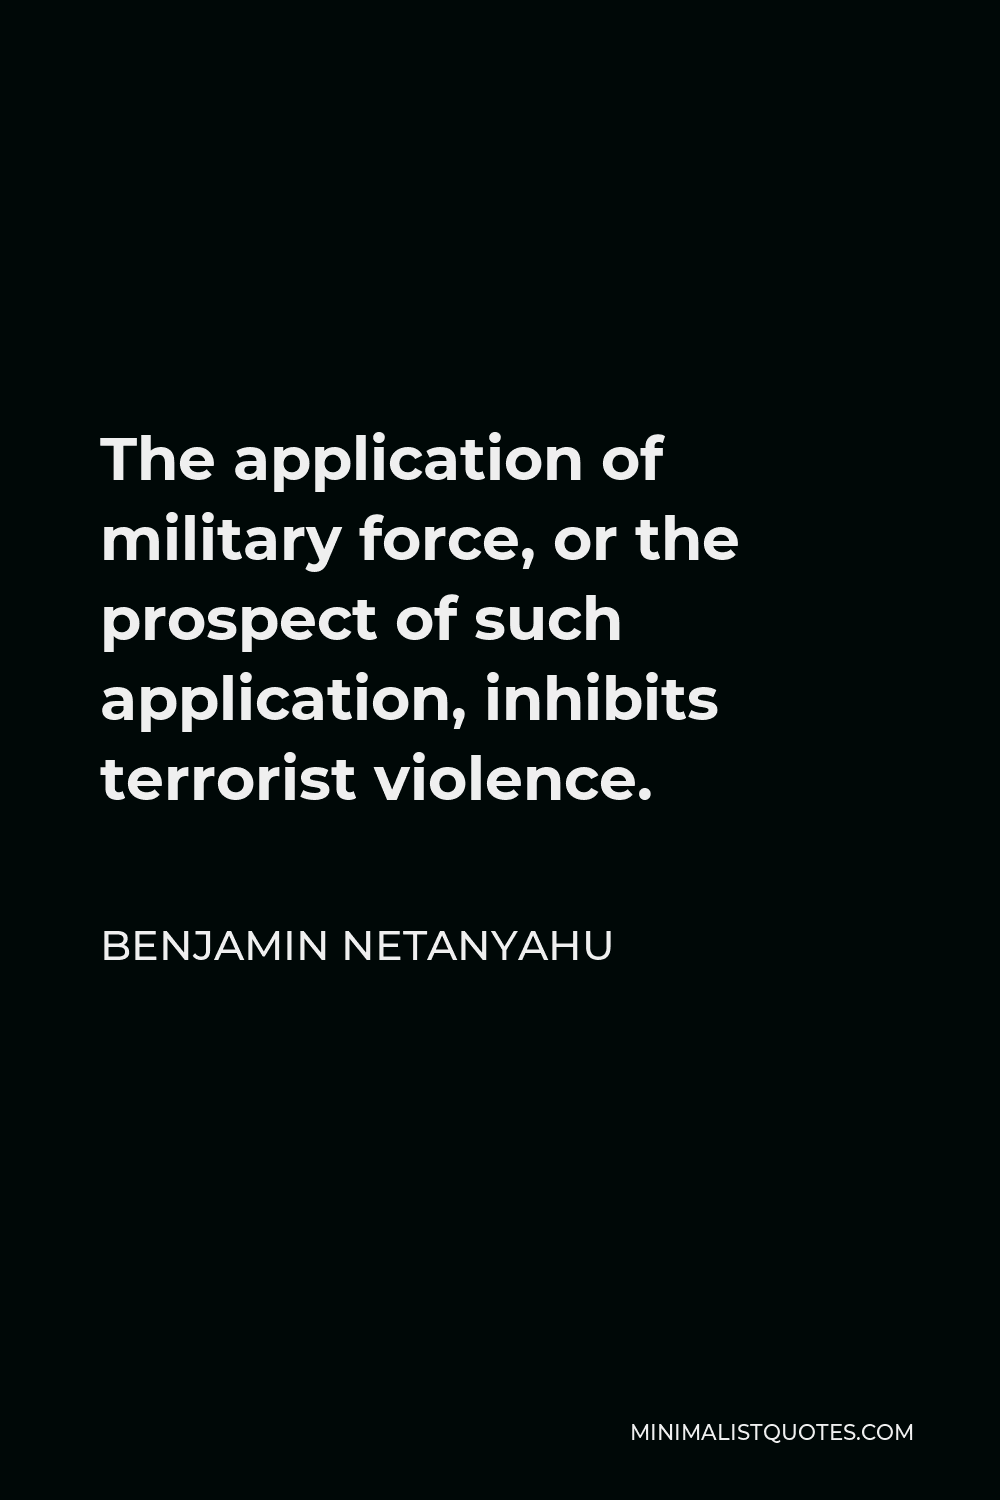 Benjamin Netanyahu Quote - The application of military force, or the prospect of such application, inhibits terrorist violence.